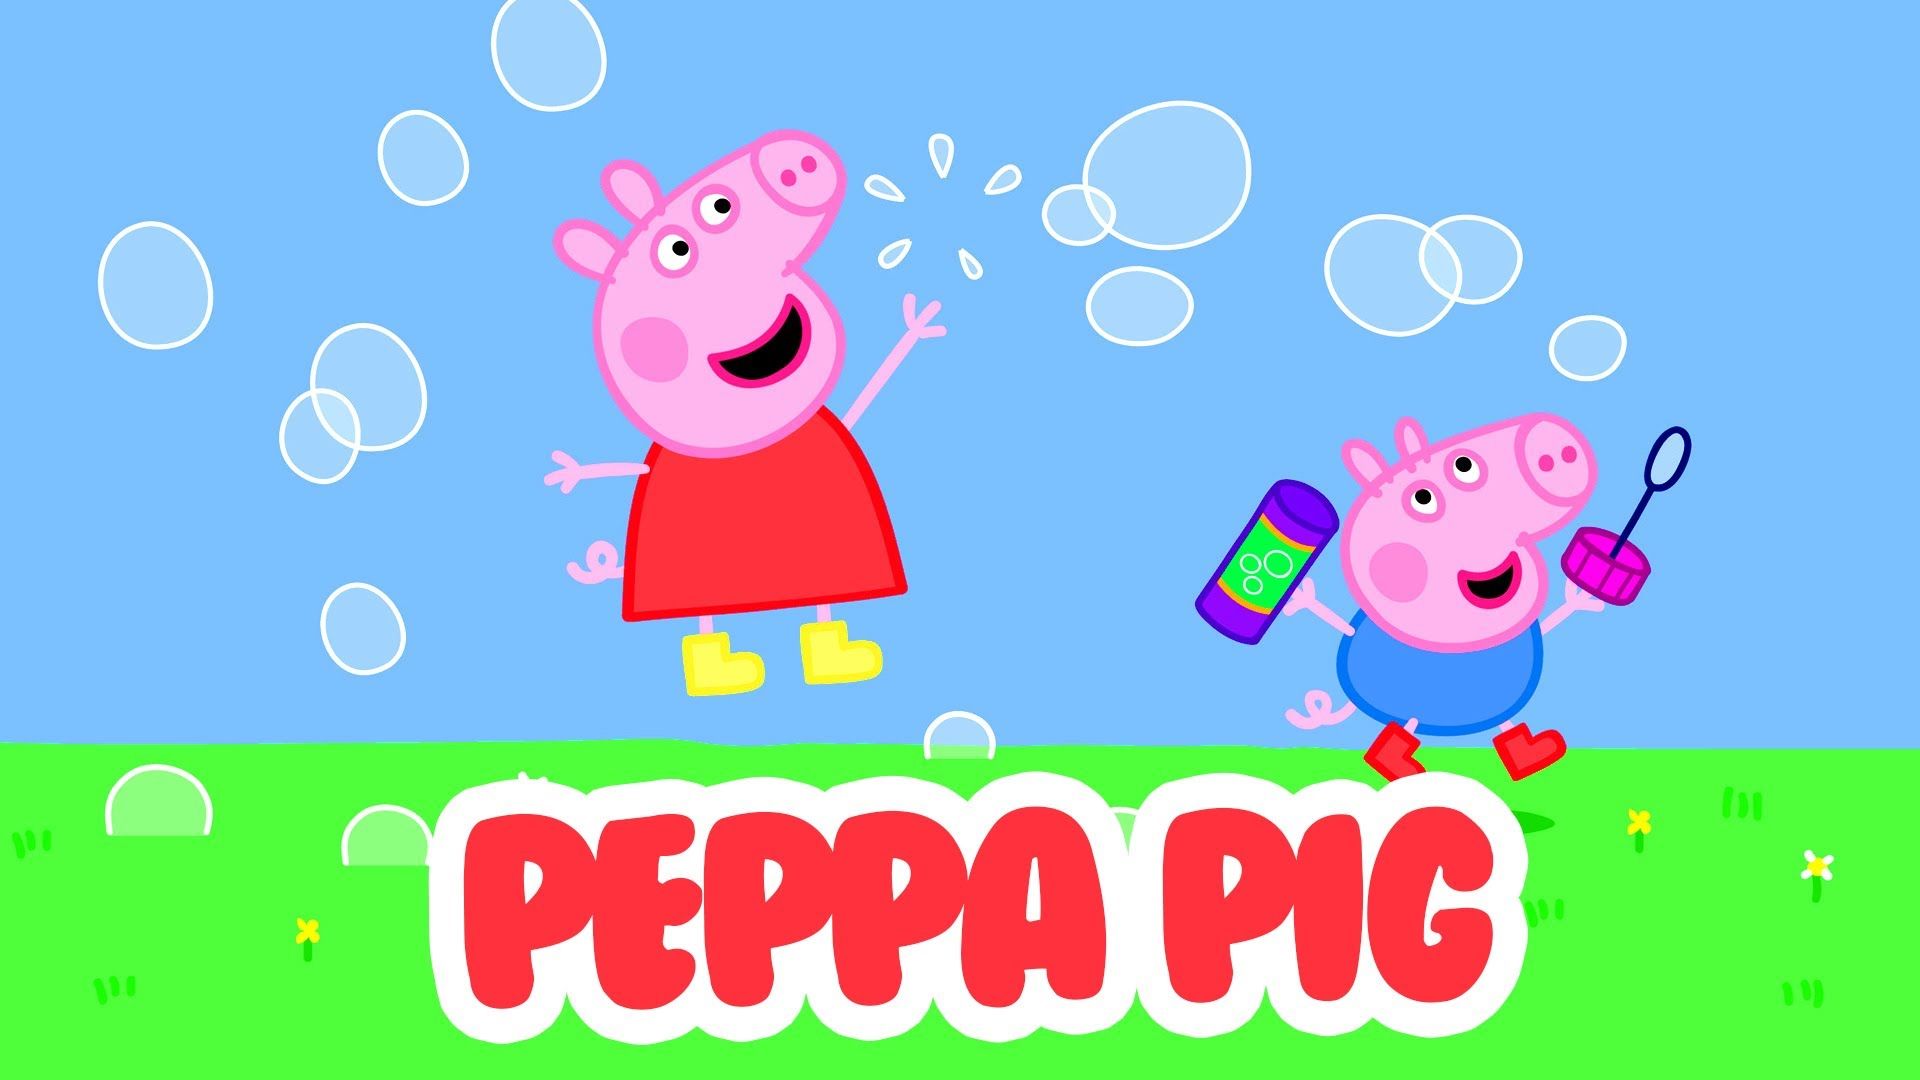 Peppa Pig HD: Peppa Pig Full Game Episodes to Play in English ...